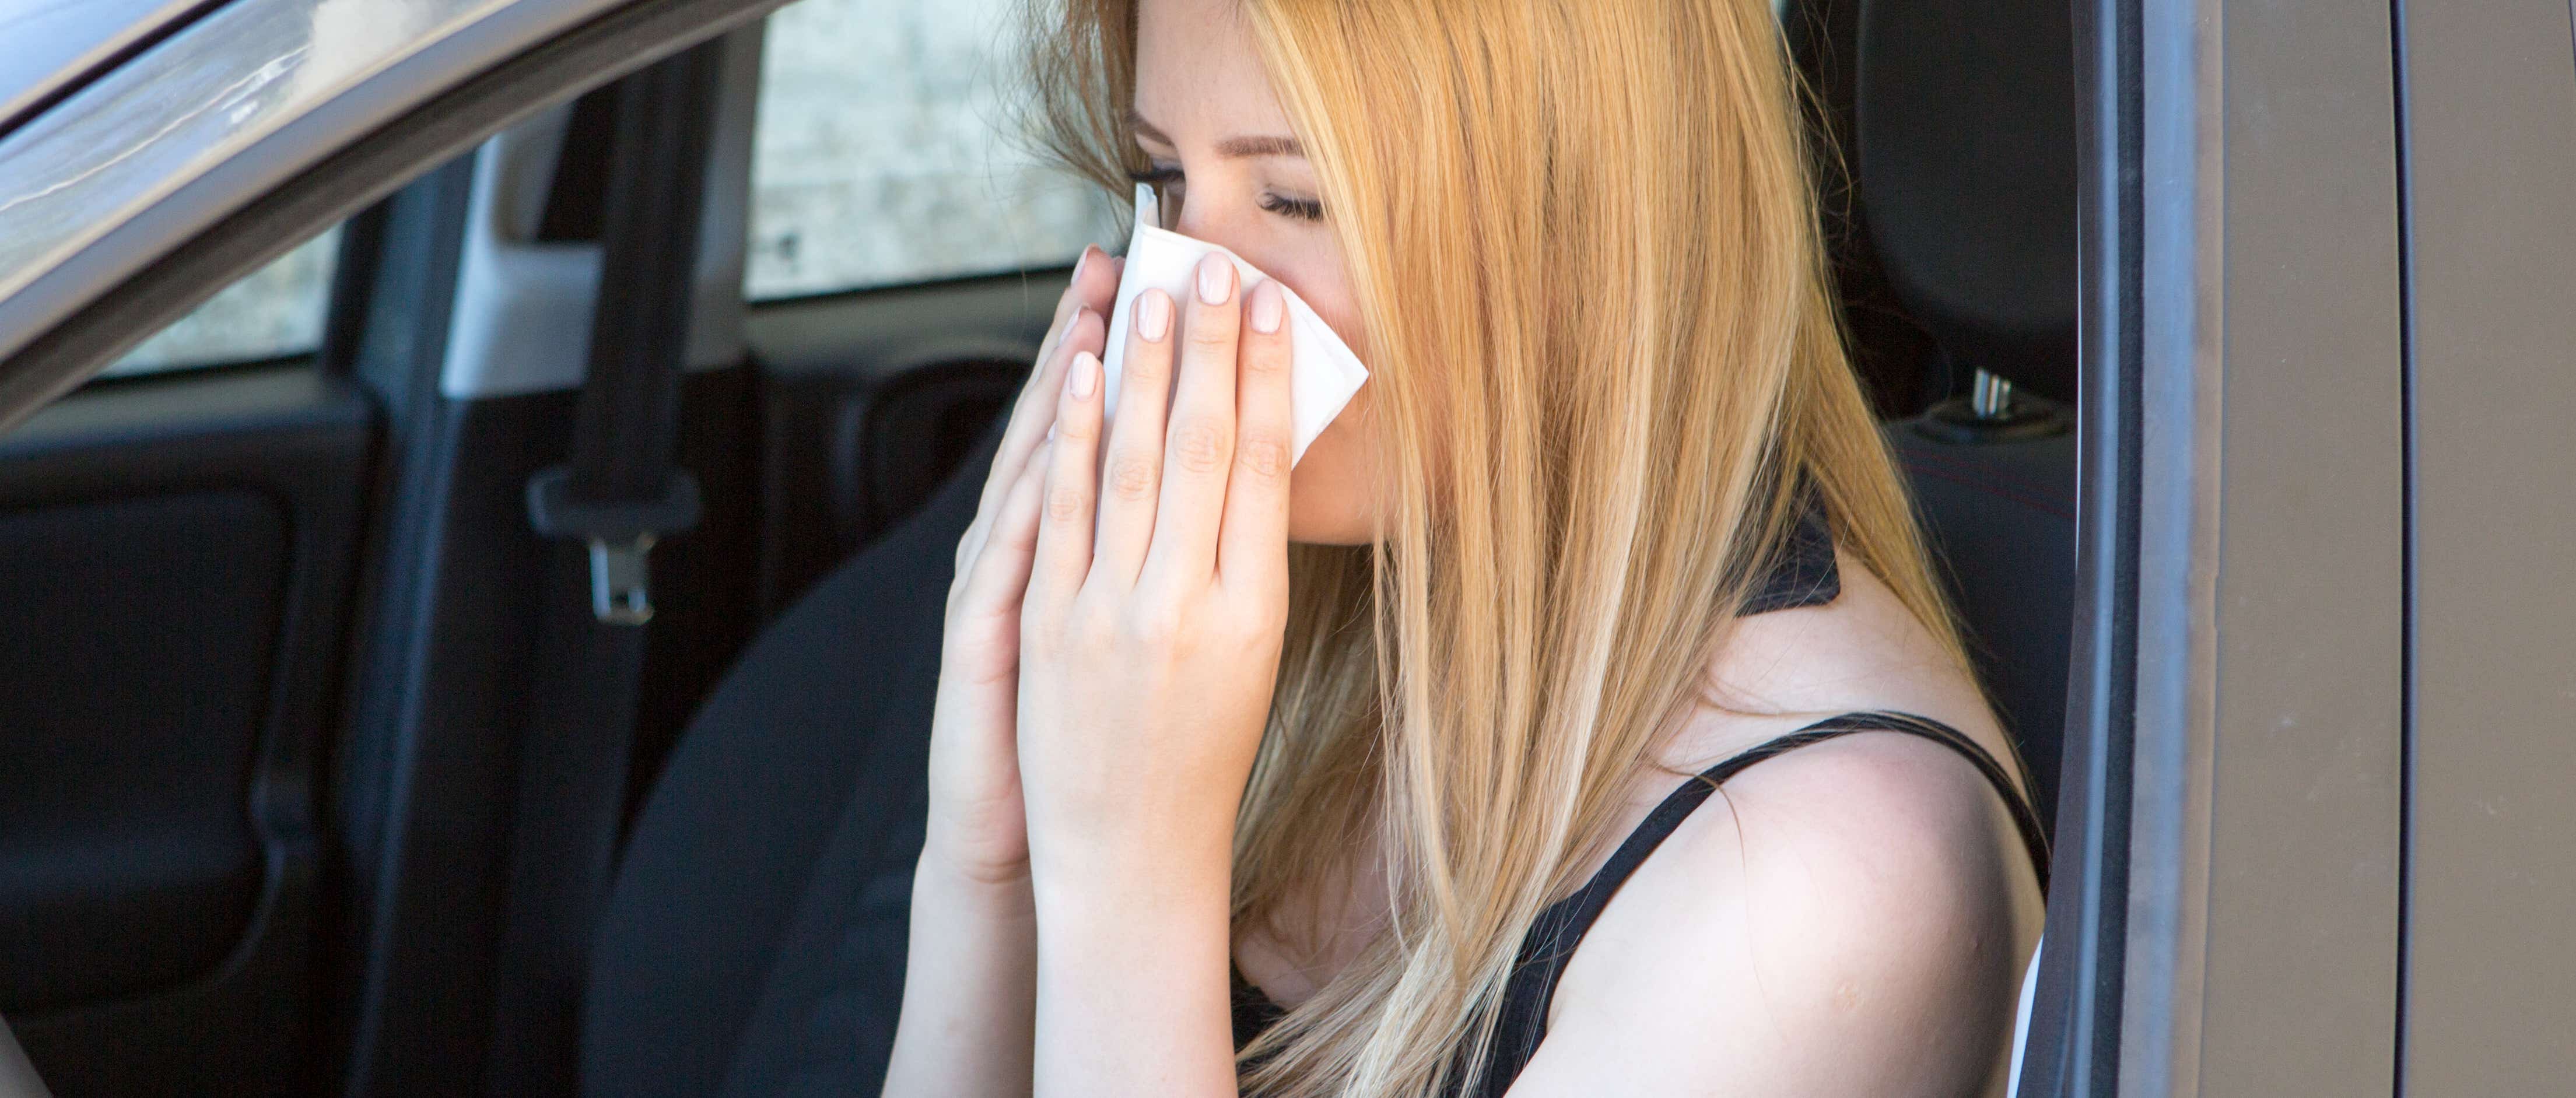 Car insurance - Guides - Don’t suffer behind the wheel: How to hay fever proof your car this summer